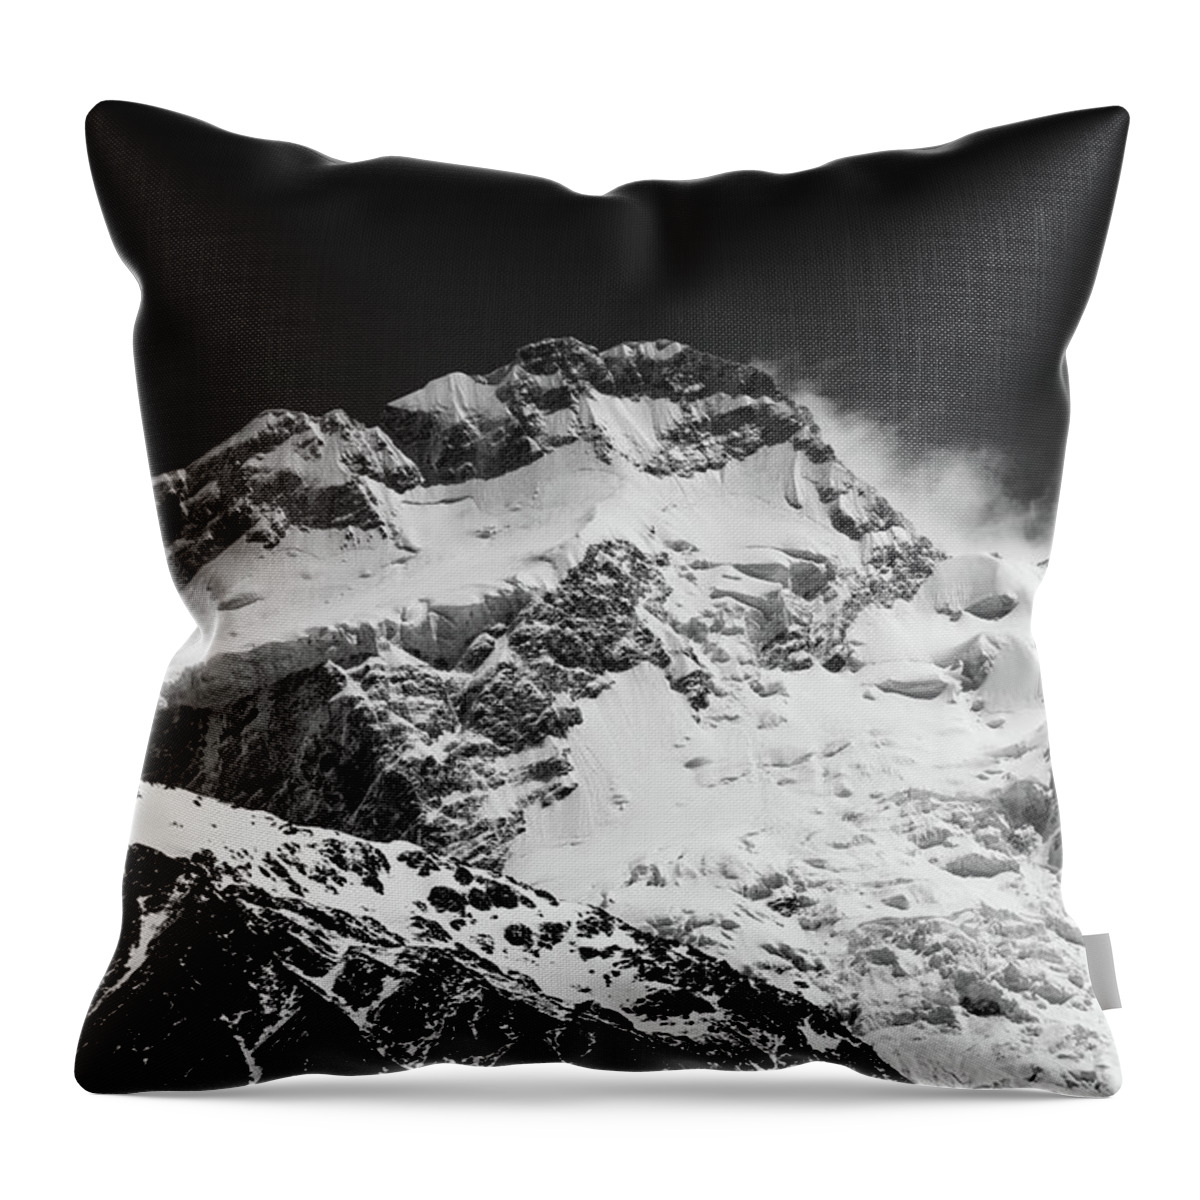 Mount Sefton Throw Pillow featuring the photograph Monochrome Mount Sefton by Mark Hunter